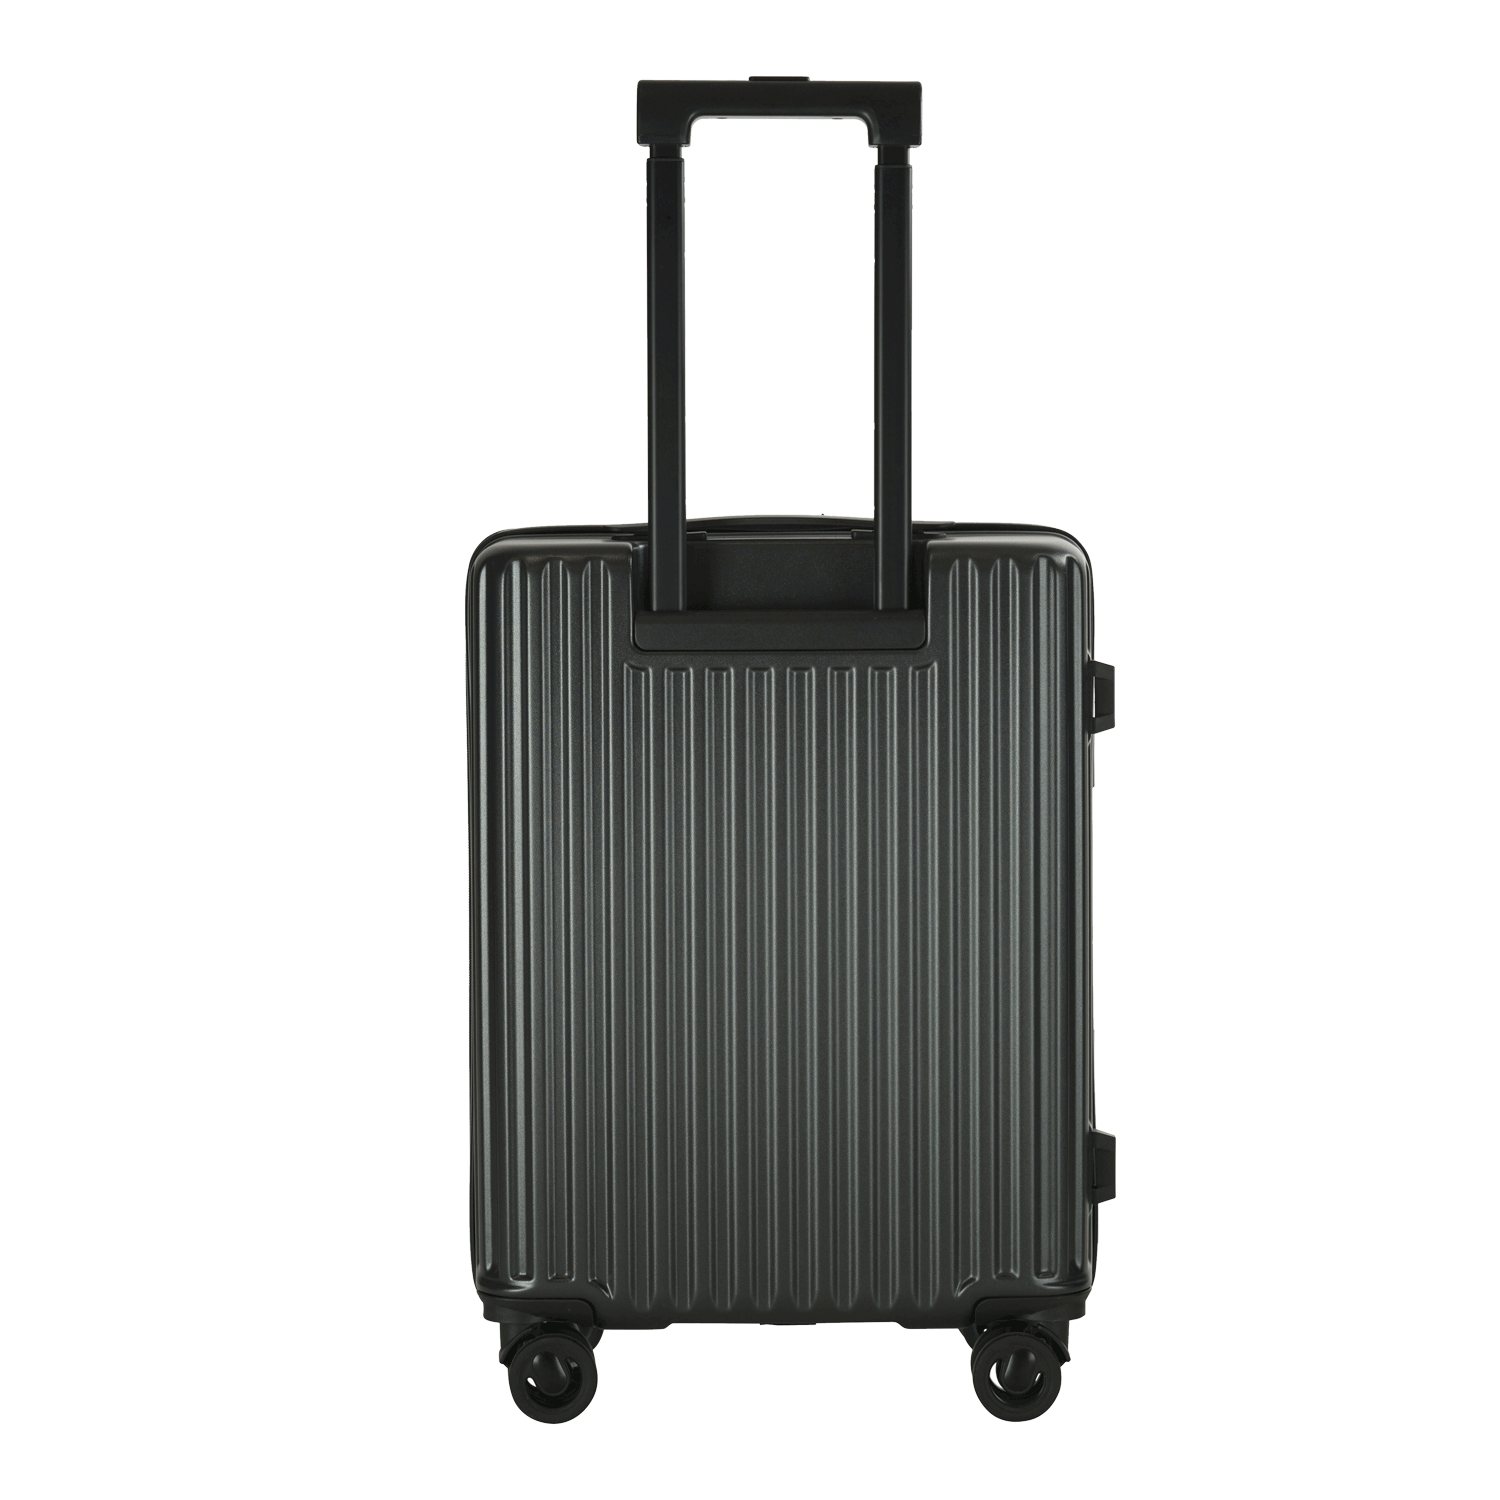 GAIAS Exclusive Manufacturer Travel Alpha Luggage with FingerPrint Scanner